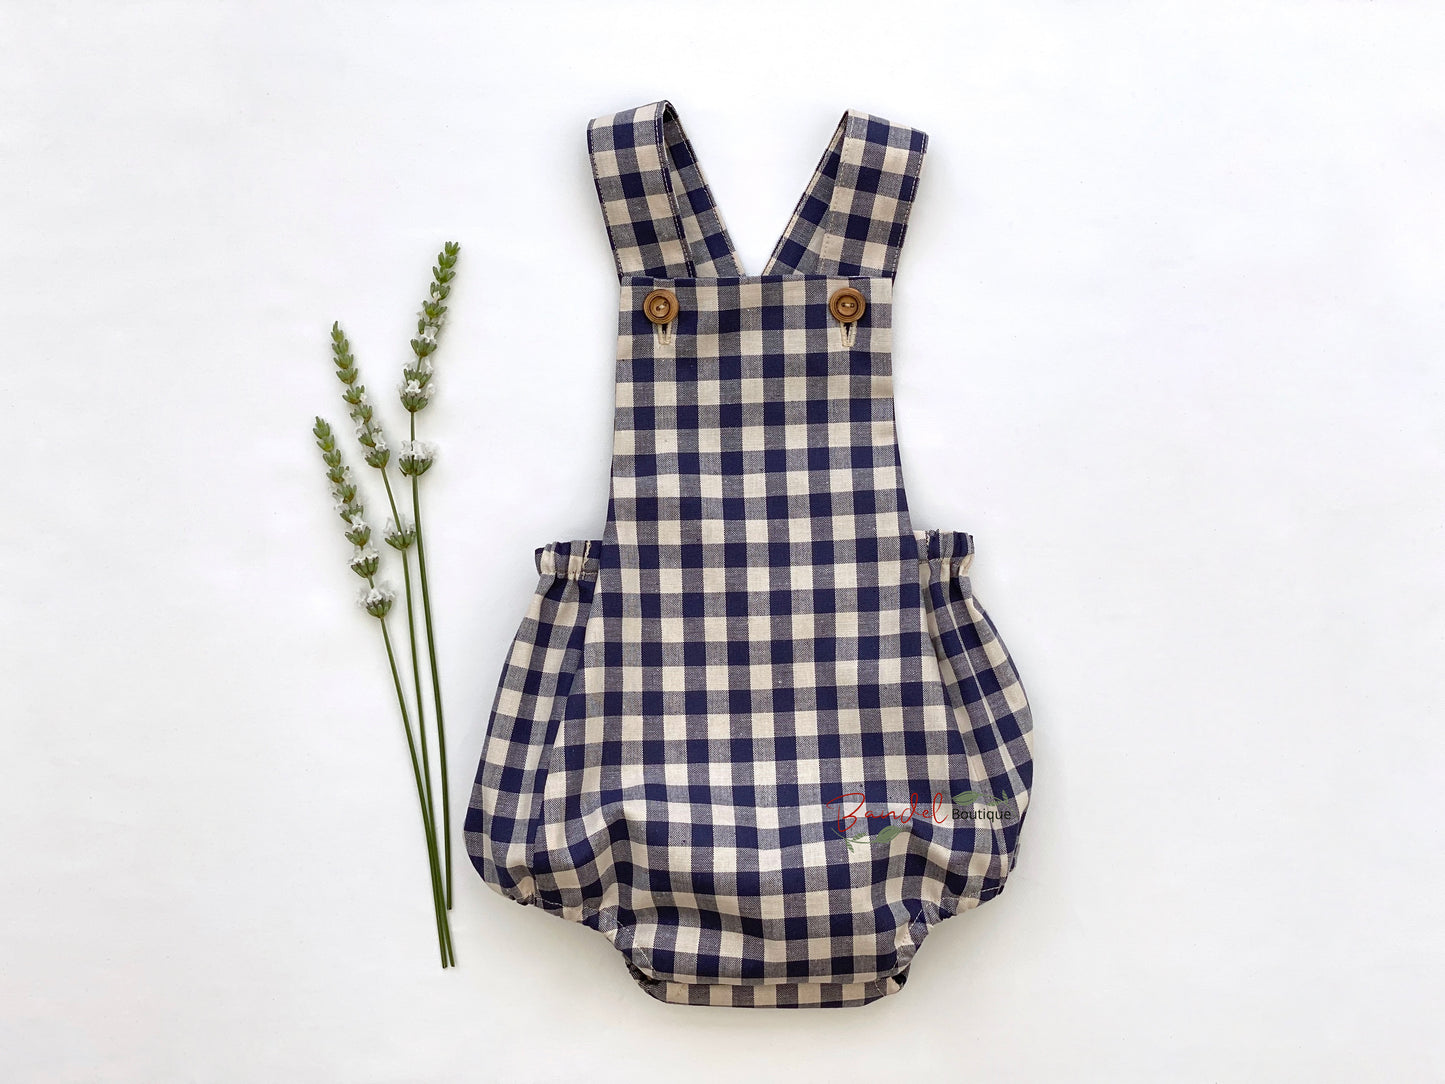 Adorable blue gingham baby romper featuring adjustable straps and rustic wooden buttons. 